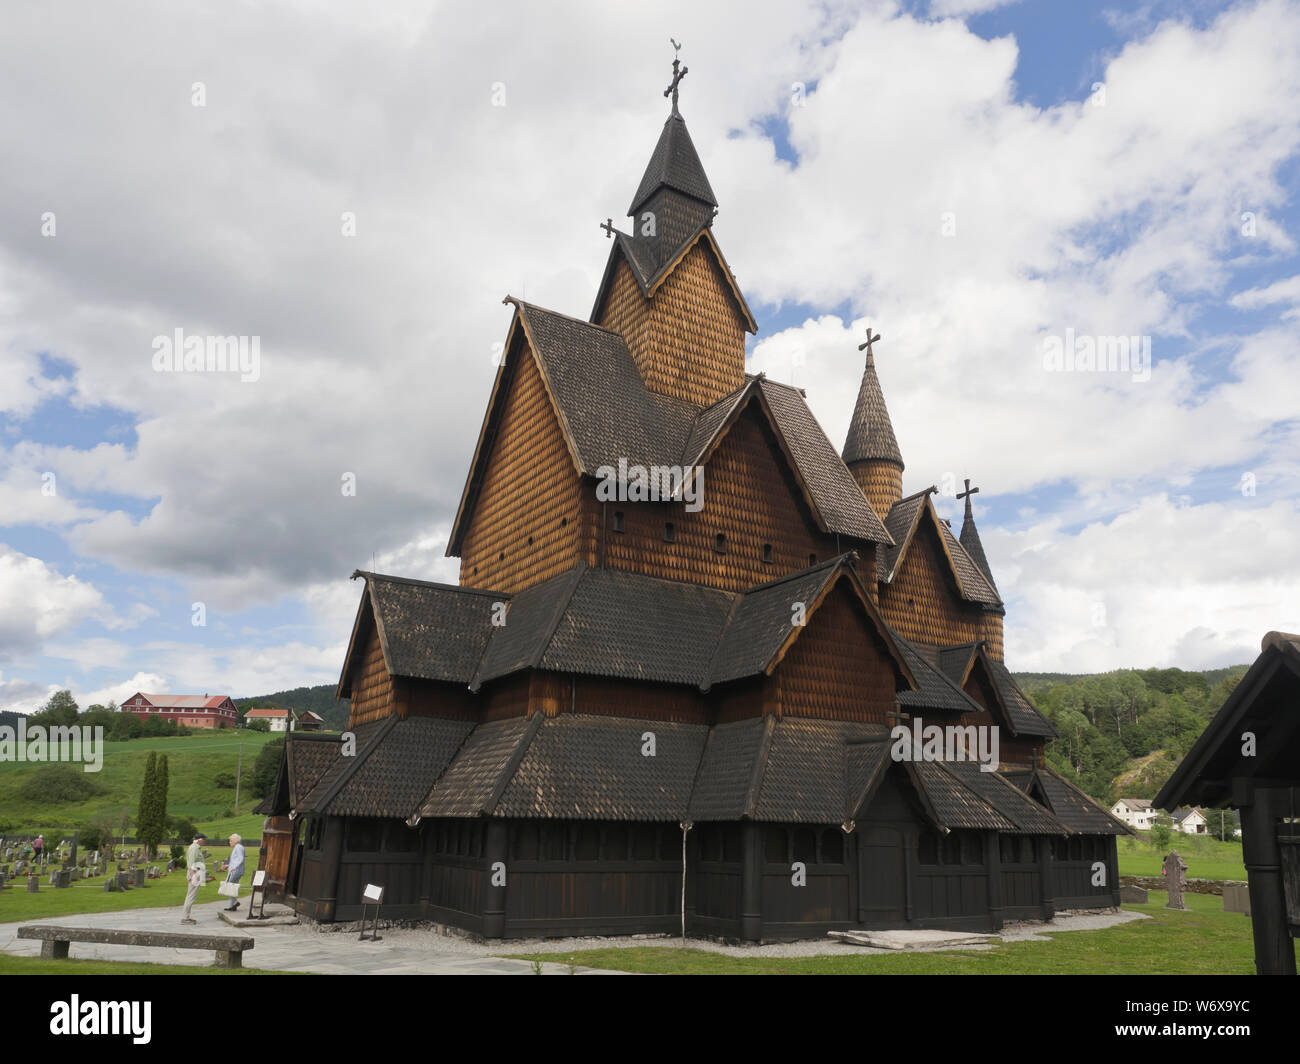 Heddal Stave church from the medieval period, a prime example of Norwegian wooden architecture and a tourist attraction Stock Photo